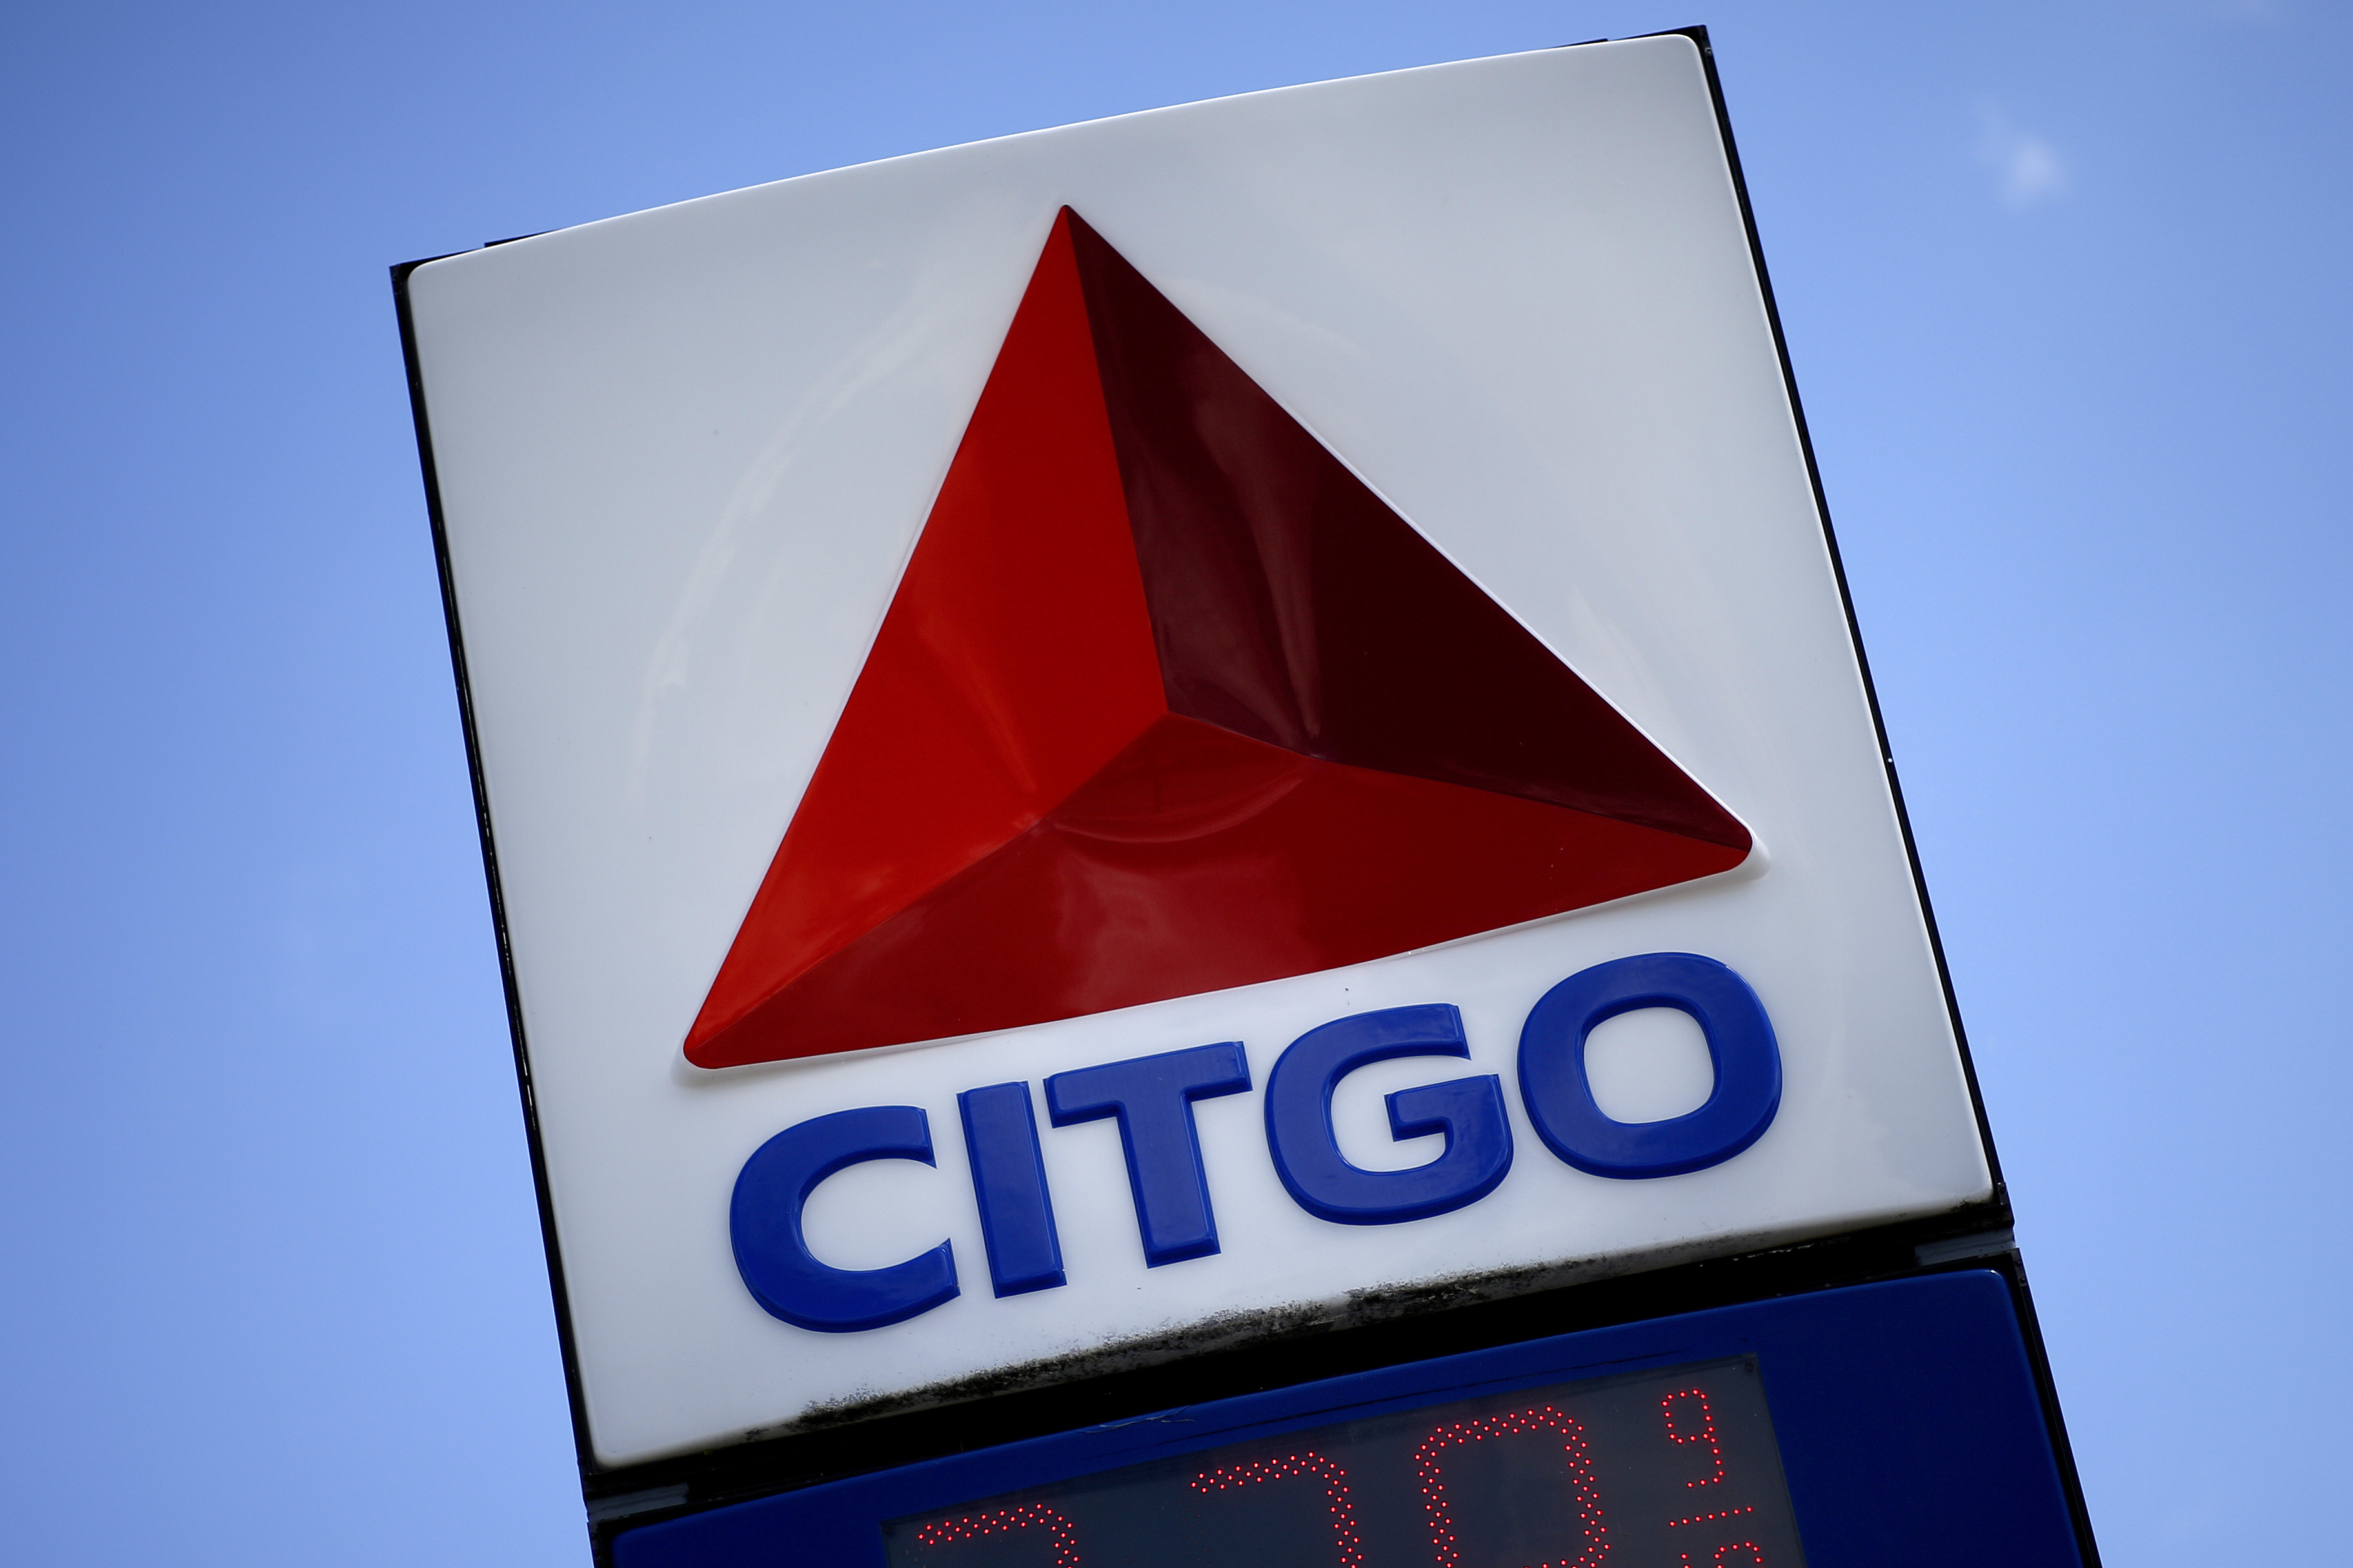 The logo of PDVSA's U.S. unit Citgo Petroleum is seen at a gas station in Stowell